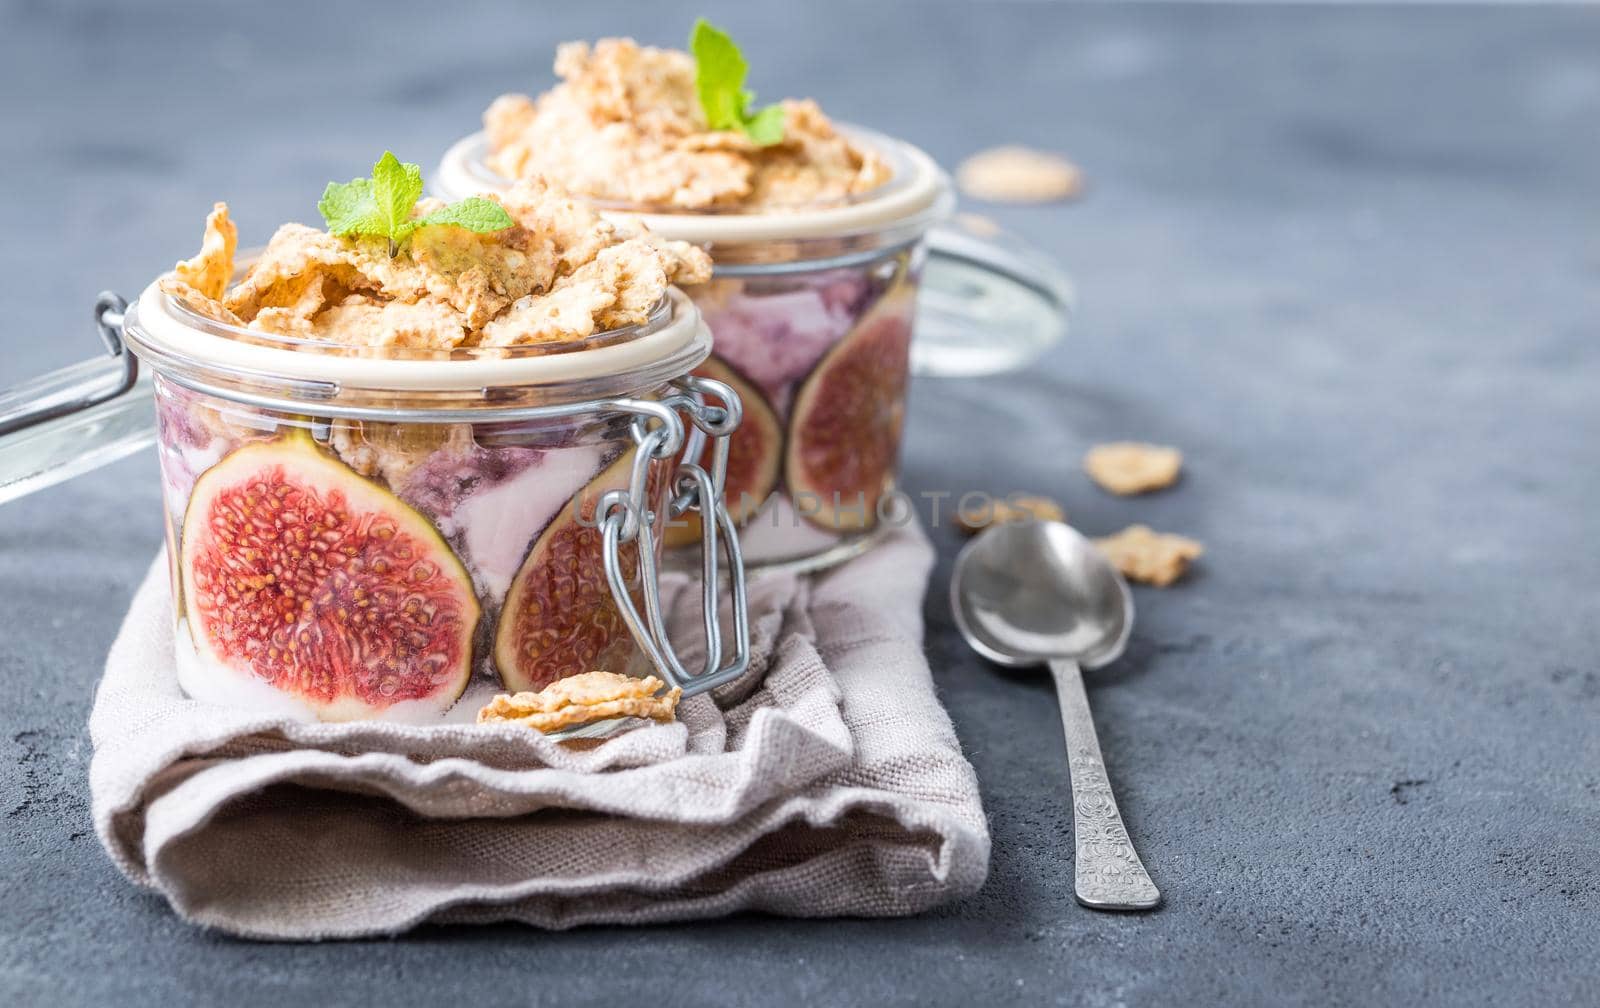 Homemade healthy yoghurt in glass pot with cereals, figs, mint on rustic concrete background. Healthy morning breakfast. Freshly made yoghurt with oat granola and fruit. Yoghurt in jar with muesli